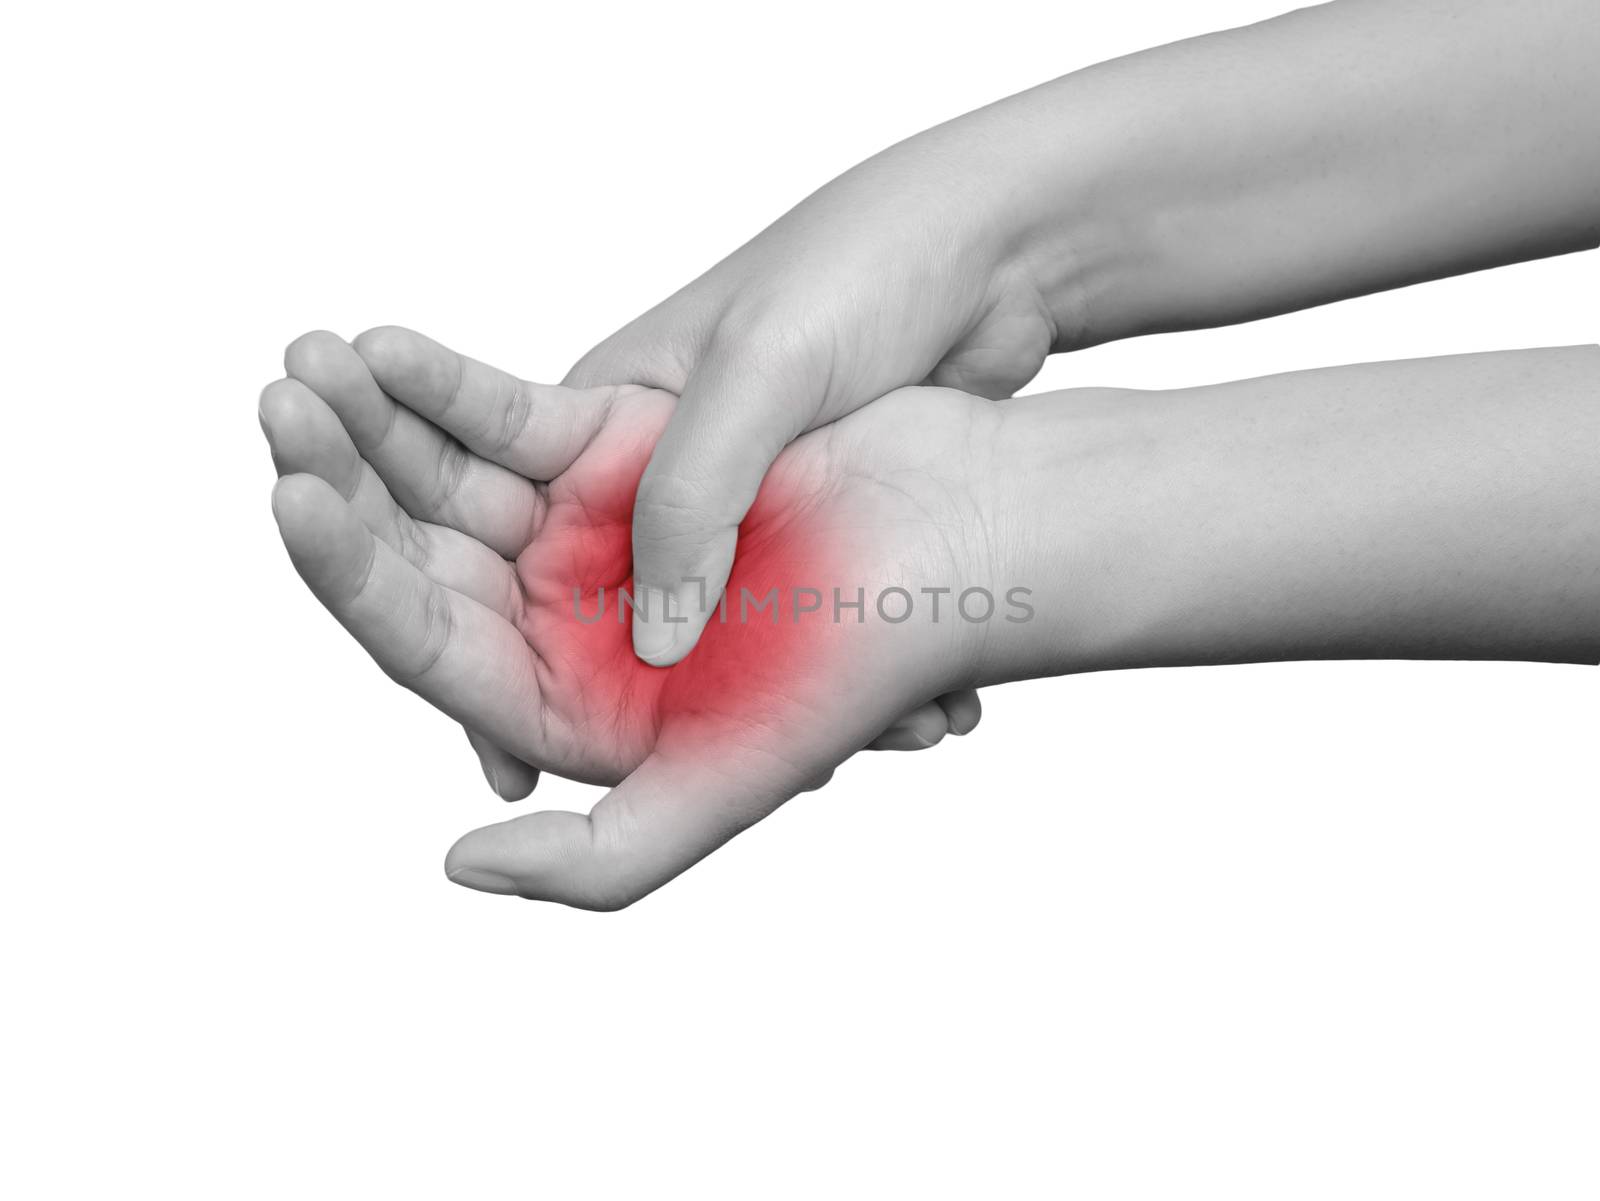 woman suffering from pain in hand. mono tone highlight at hand isolated on white background. health care and medical concept